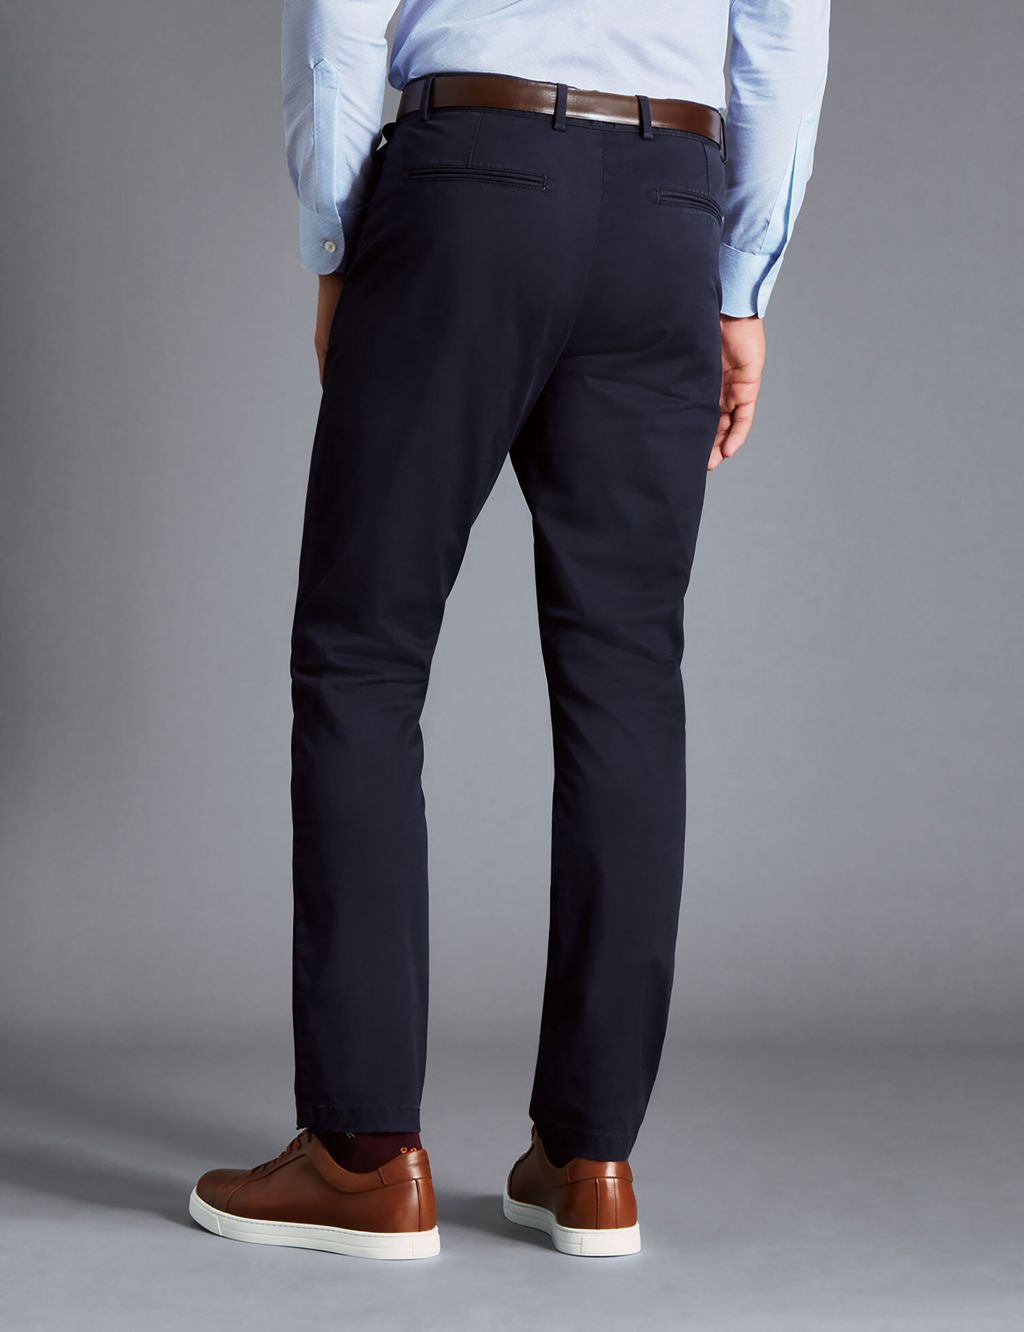 Slim Fit Lightweight Flat Front Trousers image 3